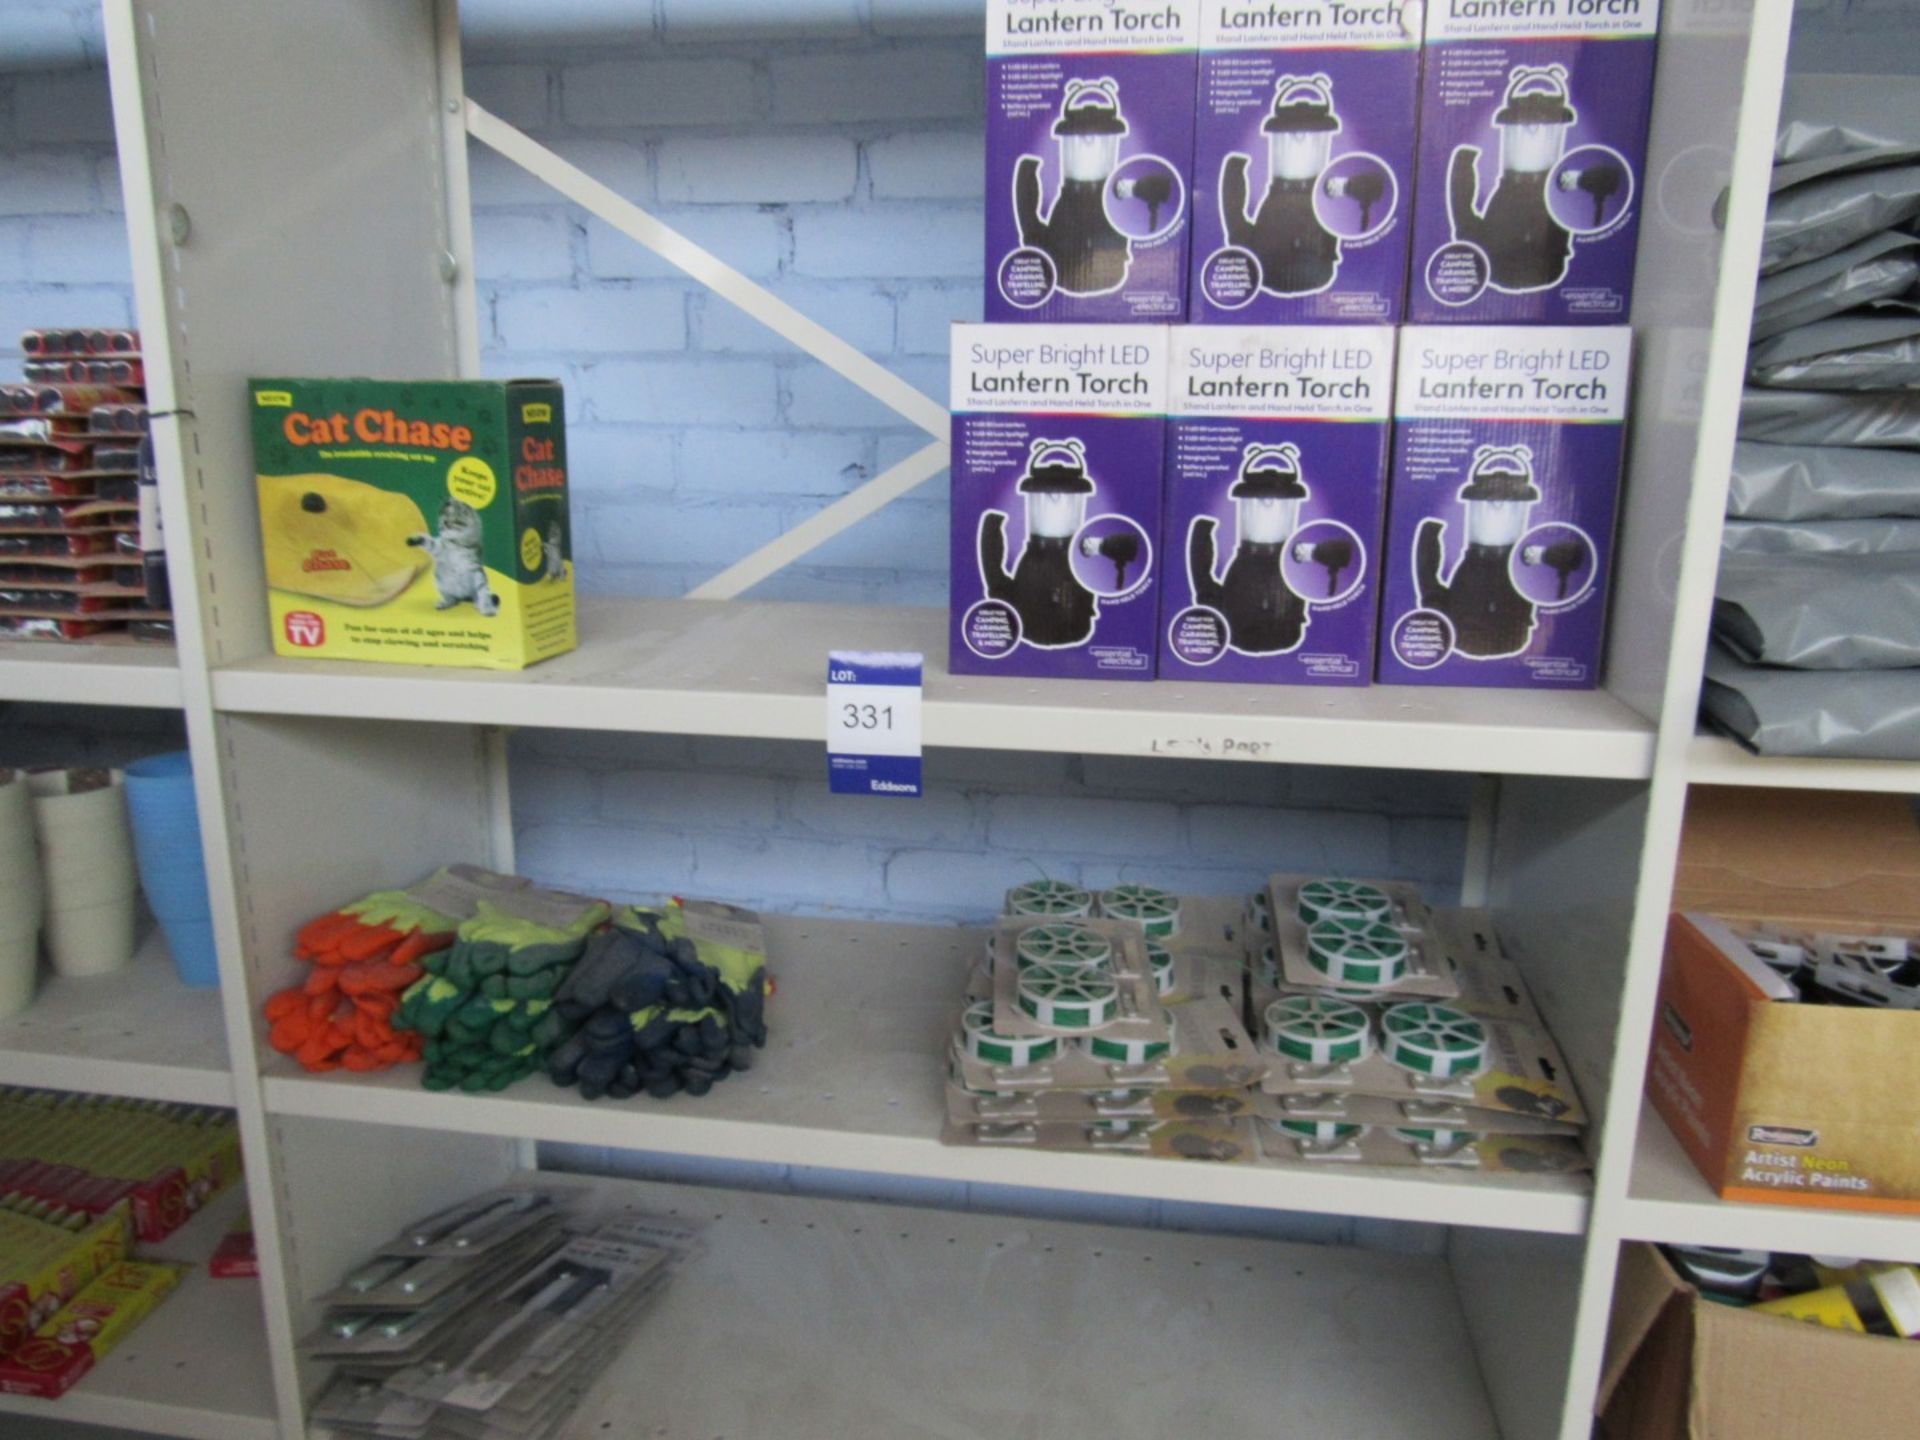 Contents of bay of shelving to include 9 x superbright LED lantern torches, work gloves, garden wire